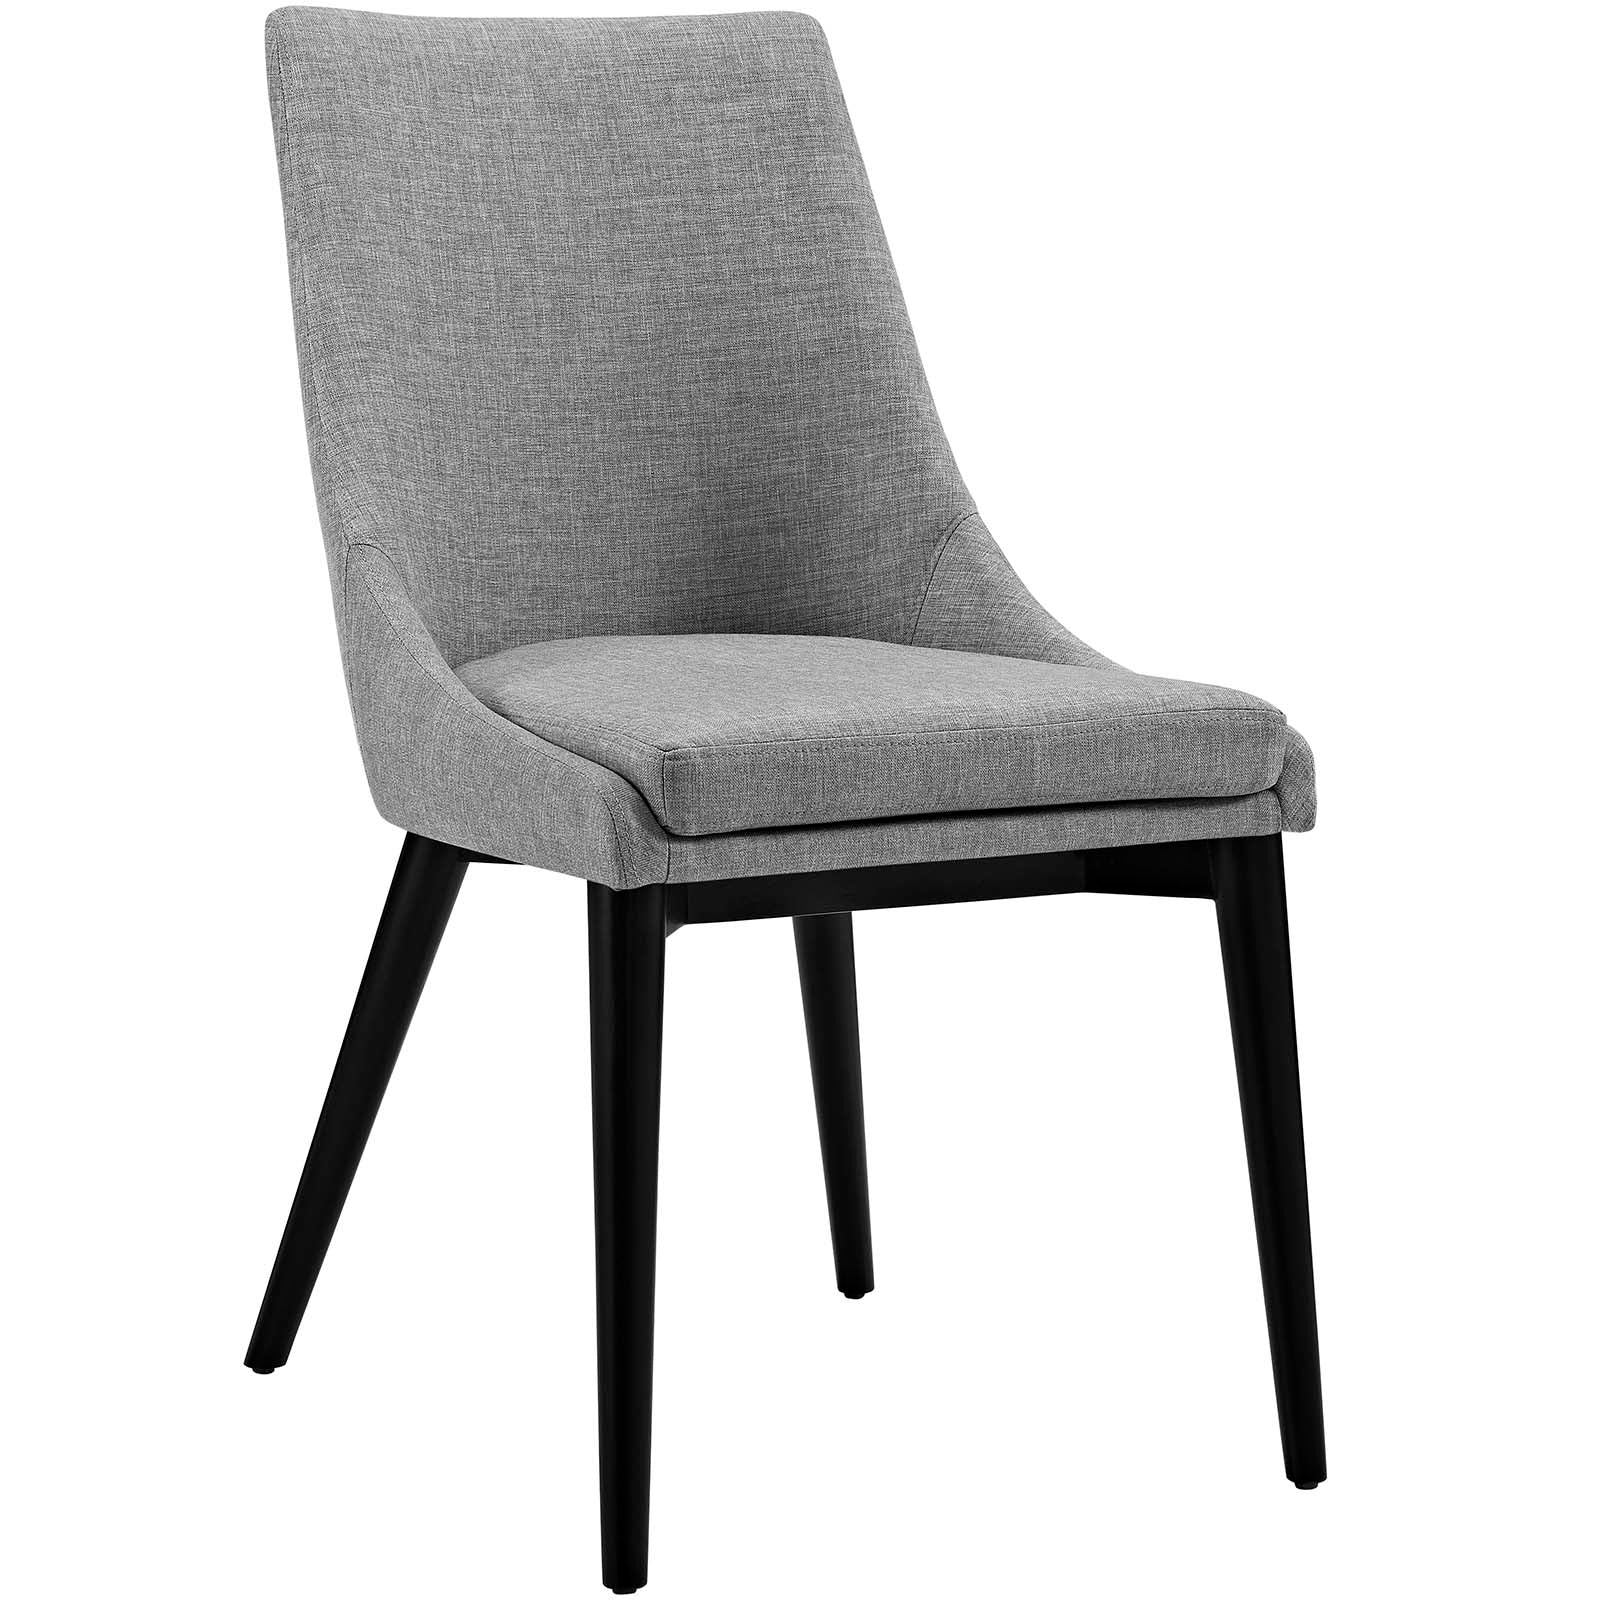 Modway Dining Chairs - Viscount Fabric Dining Chair Light Gray